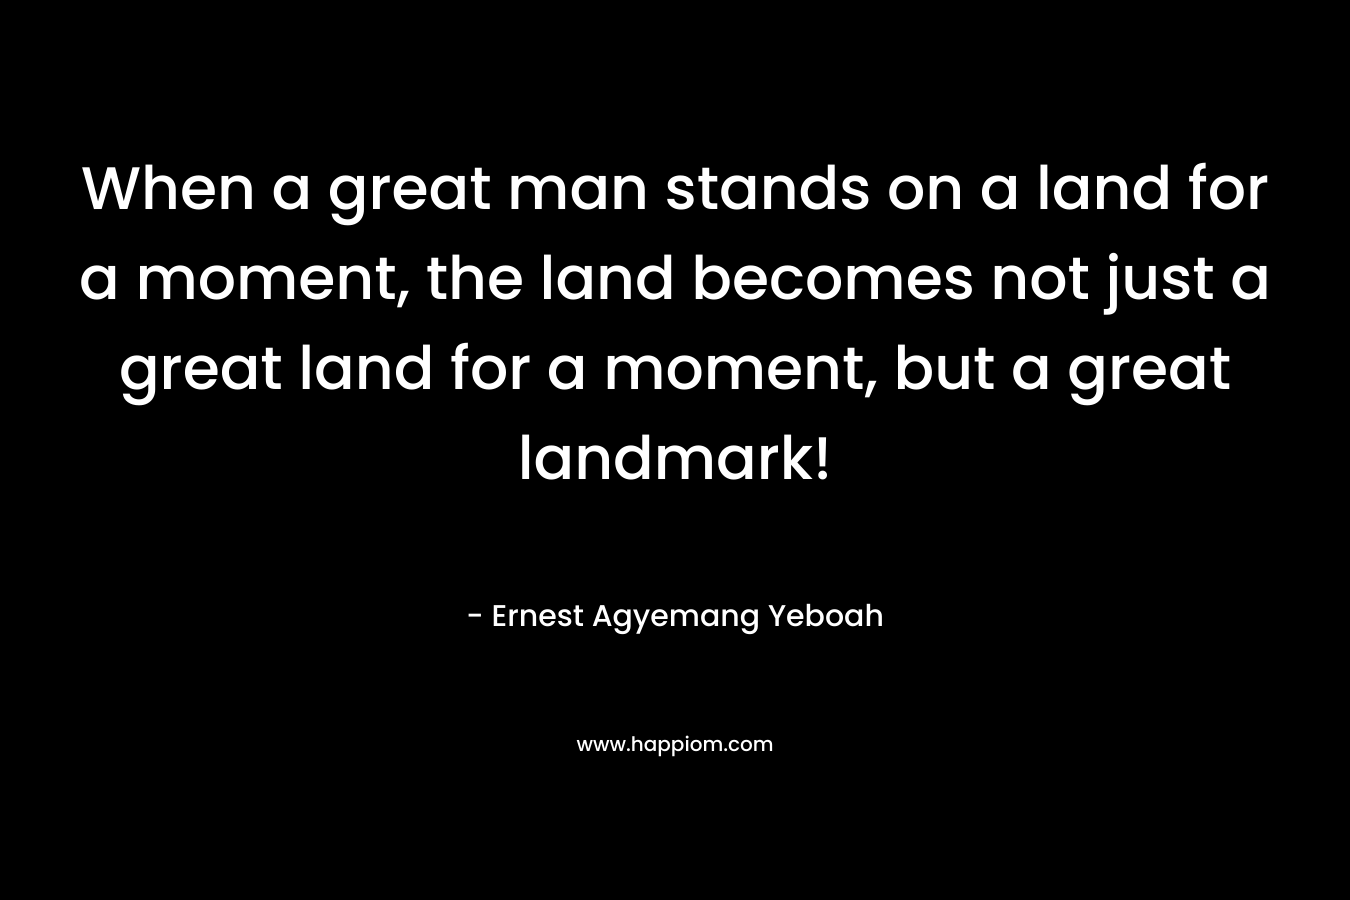 When a great man stands on a land for a moment, the land becomes not just a great land for a moment, but a great landmark!